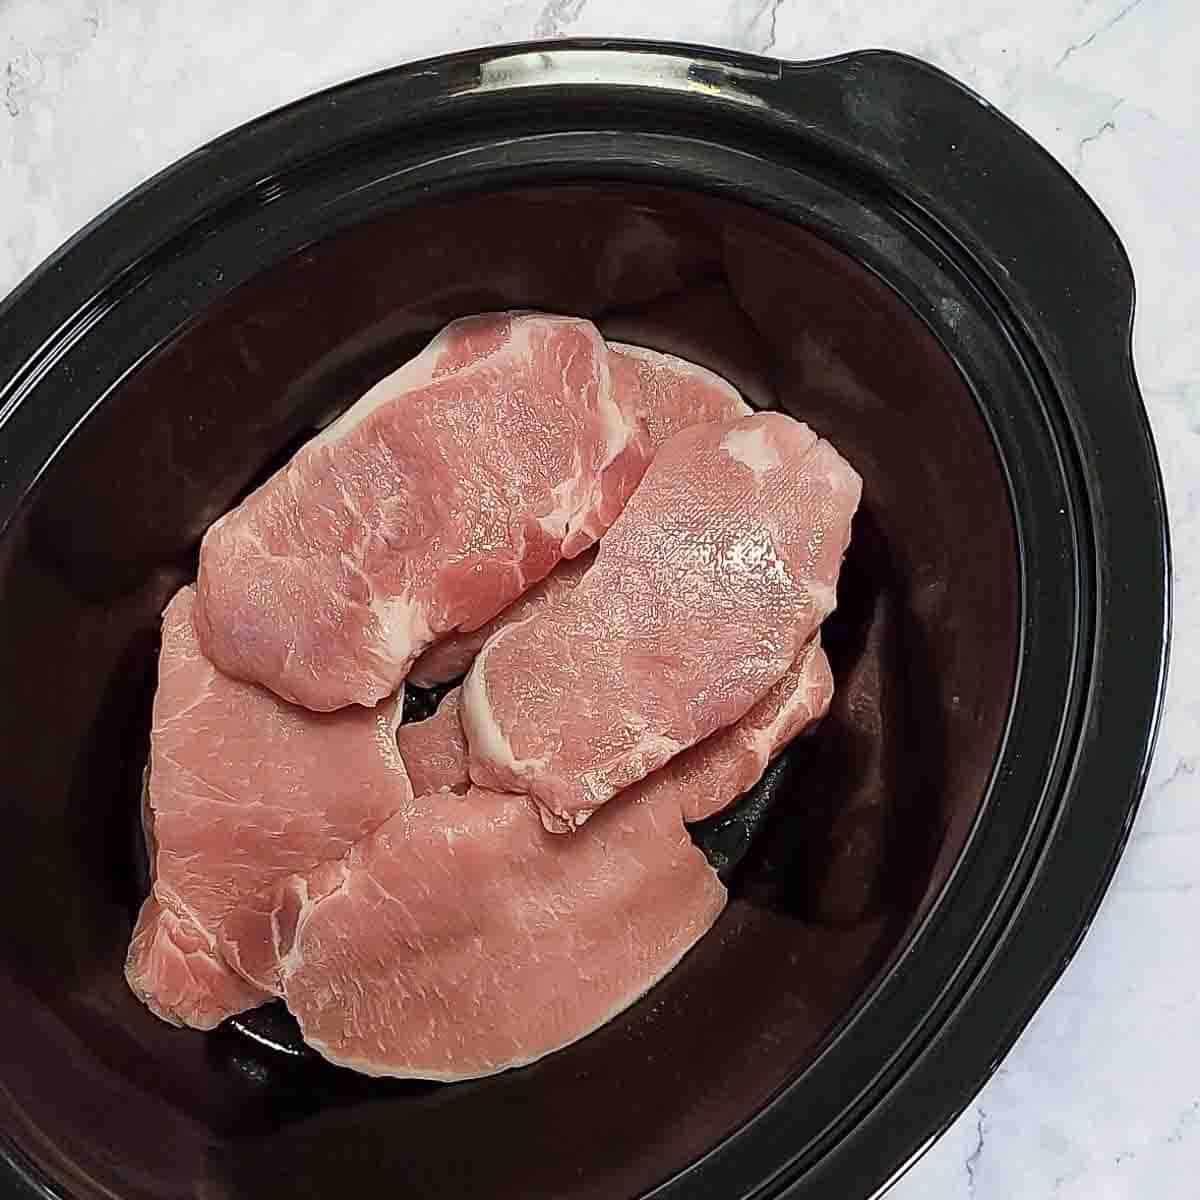 Overhead view of process shot 3 - placing pork chops in the slow cooker.